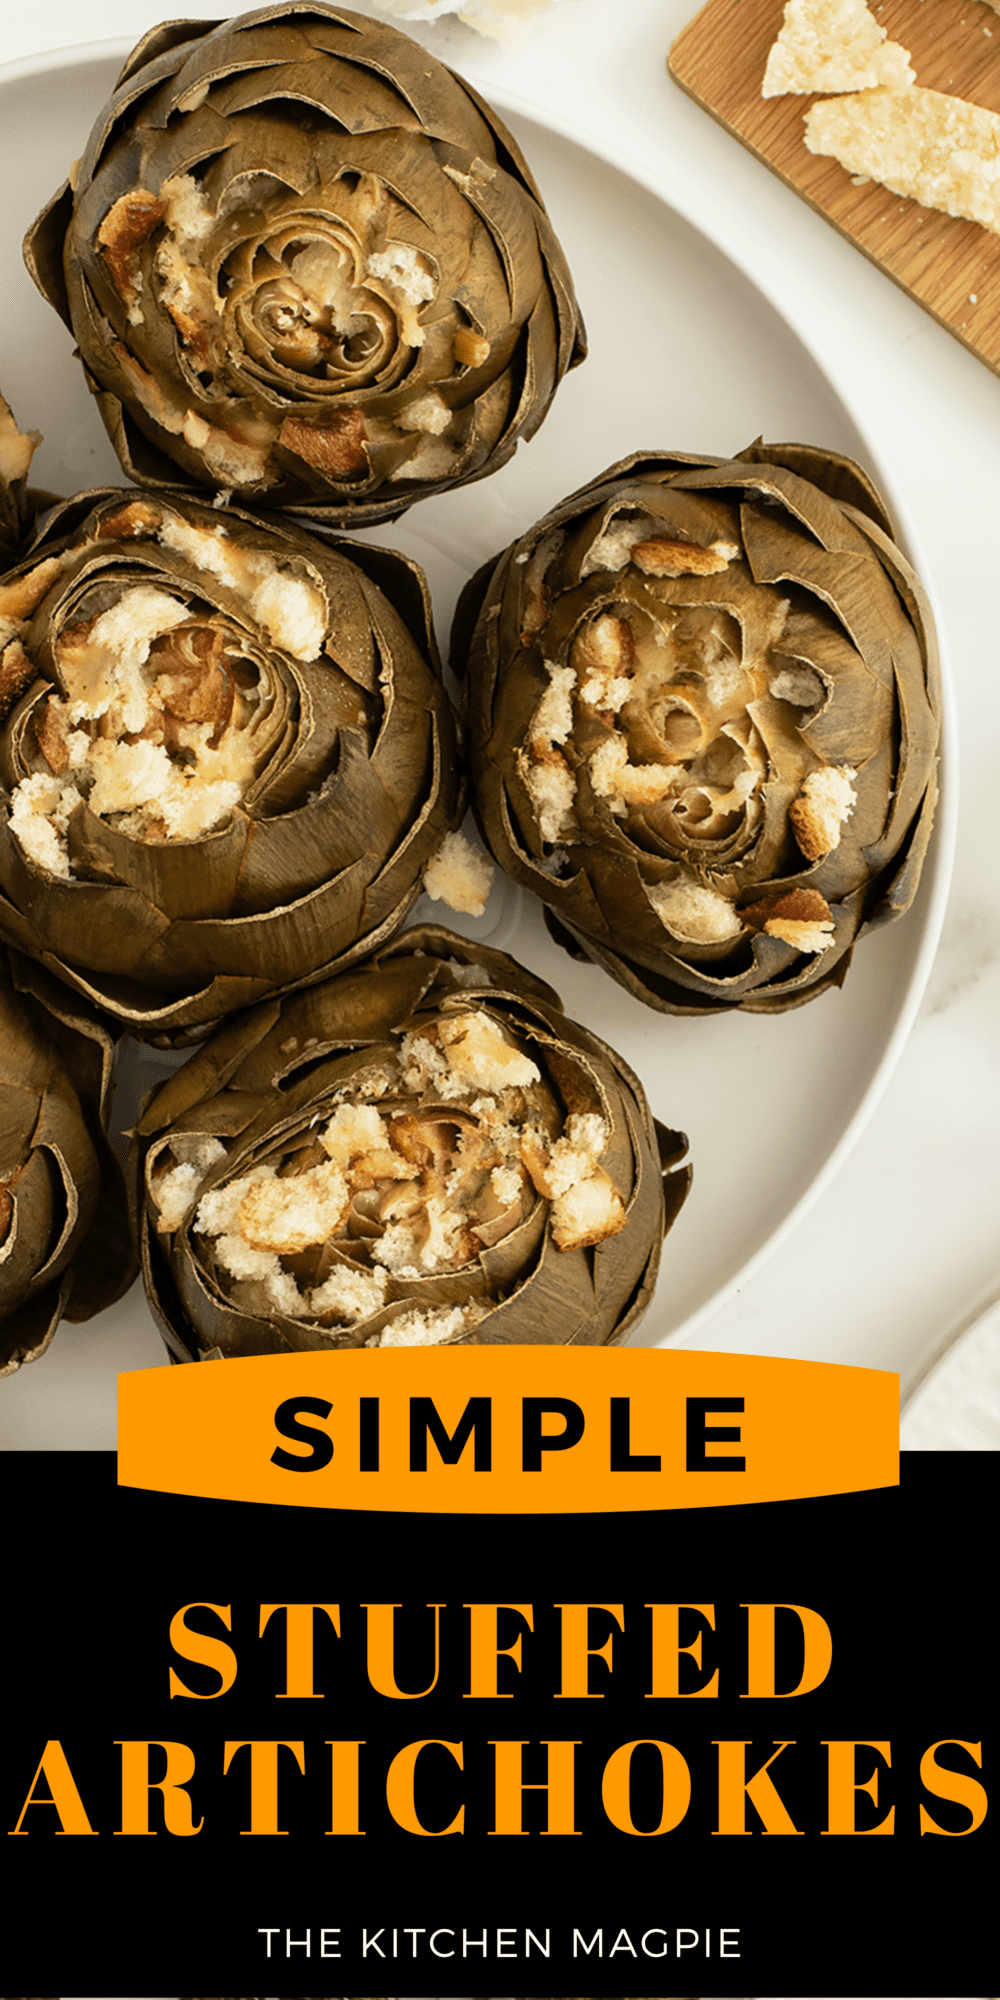 Stuffed with cheese, breadcrumbs, and whatever else you prefer, stuffed artichokes are great when made at home.